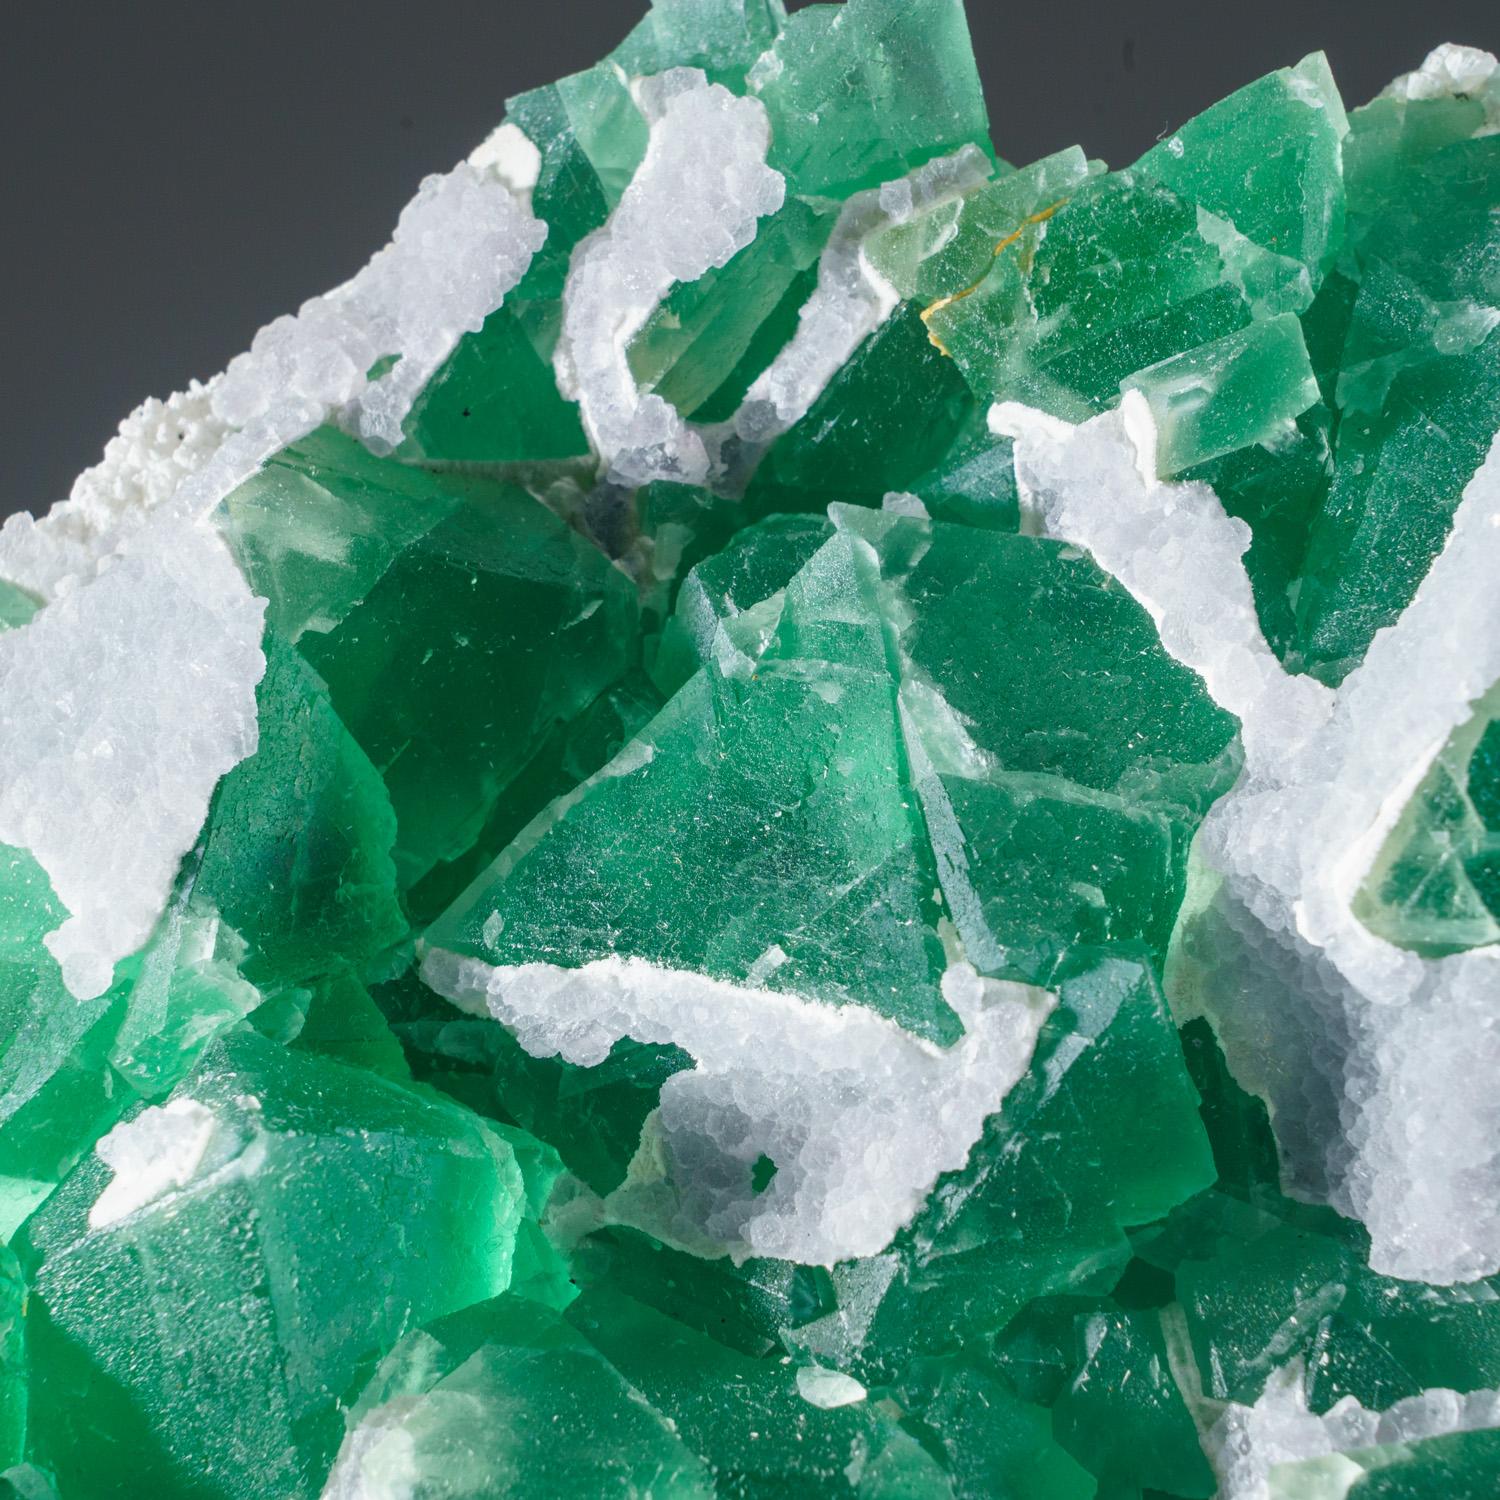 From Shanhua Pu Mine, Xianghualing, Hunan Province, China

Lustrous transparent green cubic fluorite crystals covered with colorless calcite crystals. The fluorite crystals are transparent and cubic crystal habit with complex corners of smaller